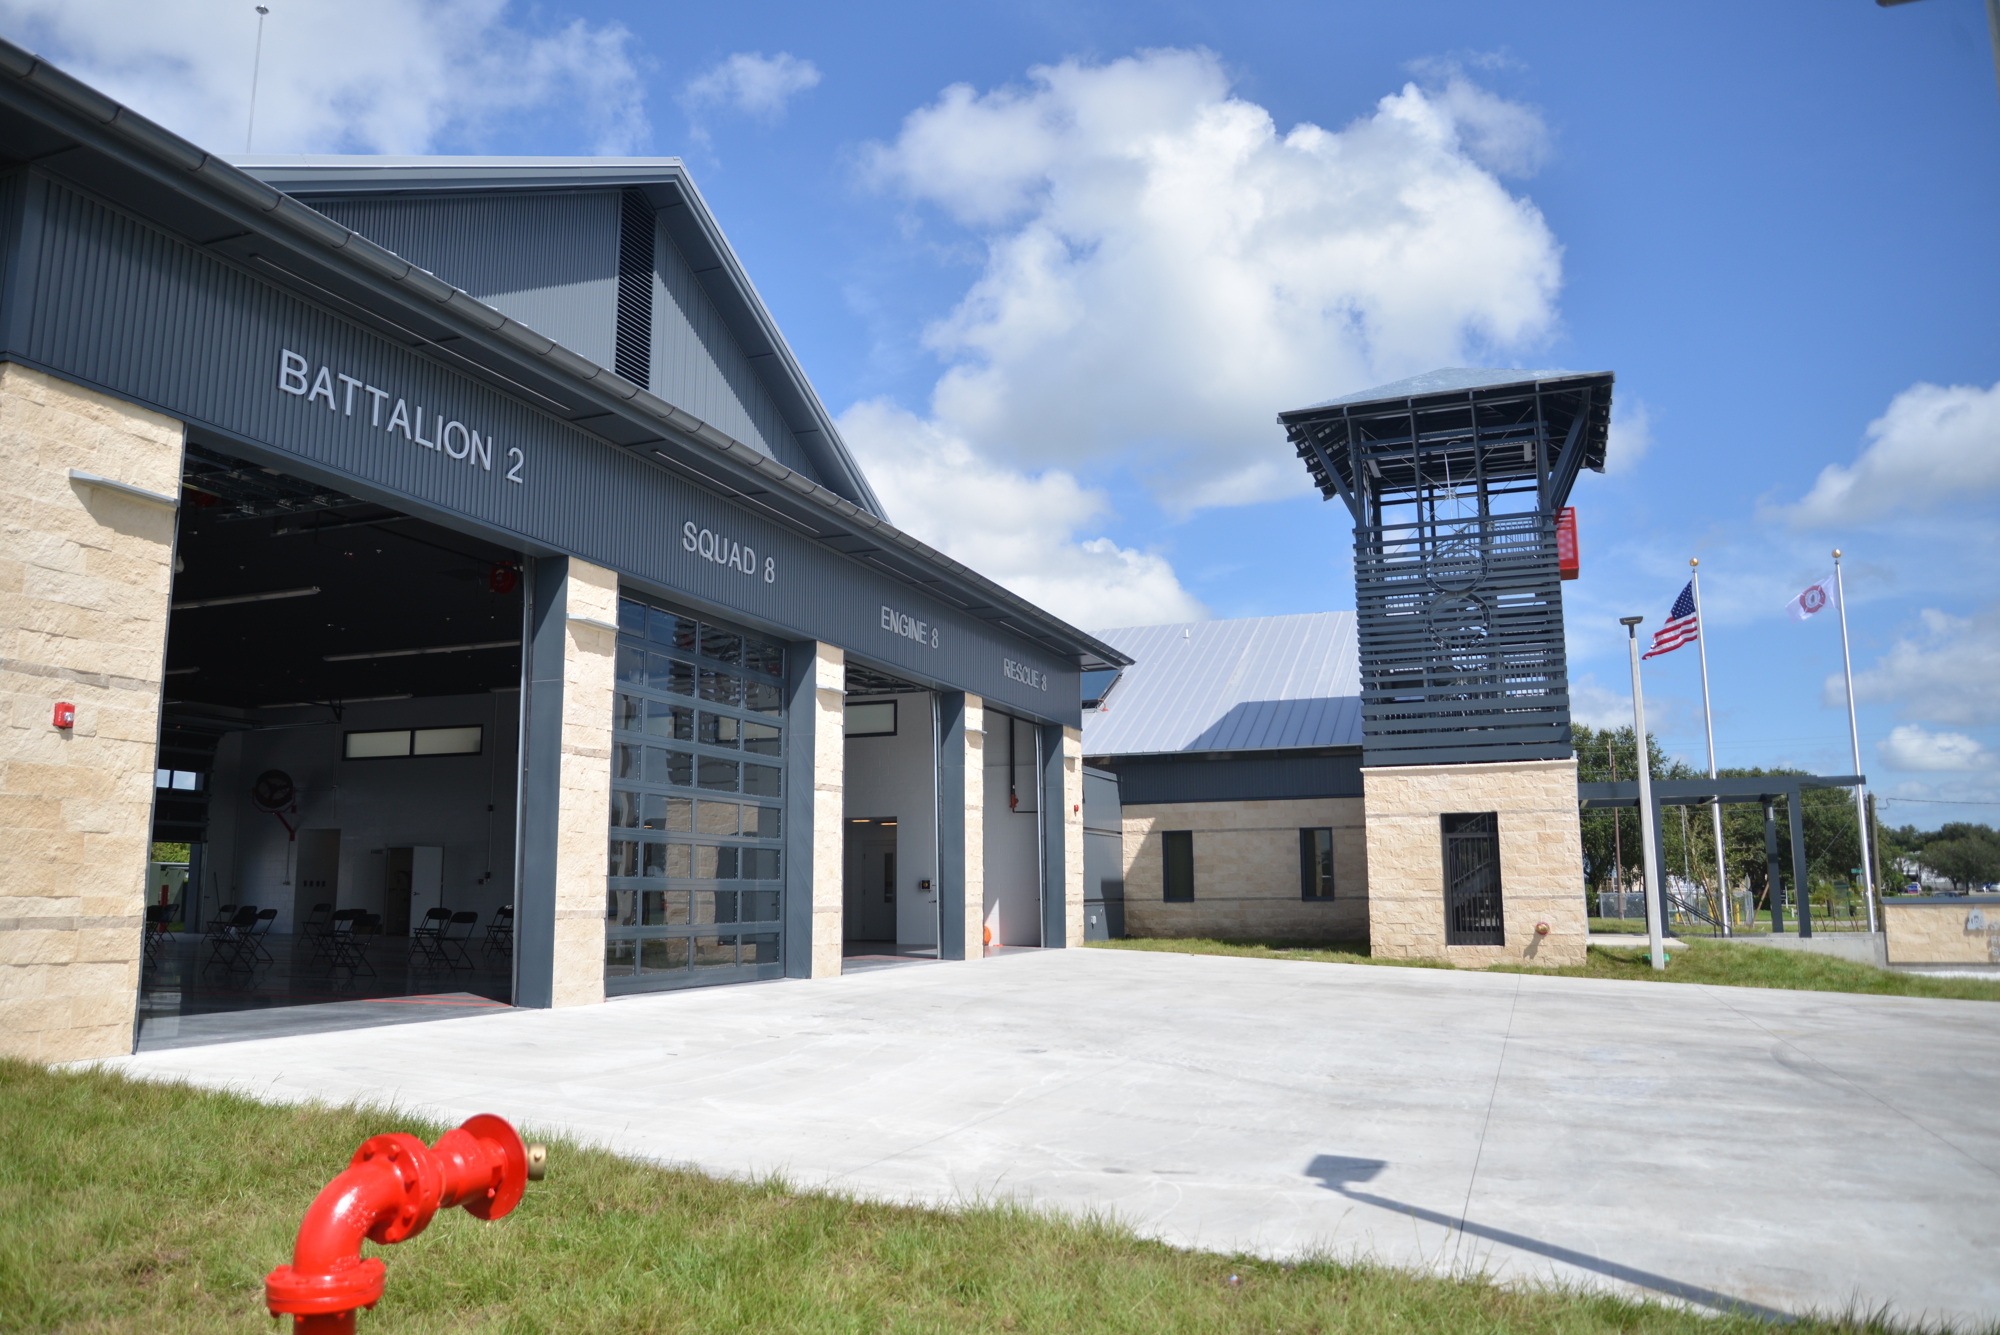 Courtesy, Sarasota County Communications. The main station has 14 bunk rooms, a kitchen and dining area, offices, an exercise room, a day room with chairs and a TV, a gear locker room and four garage bays.